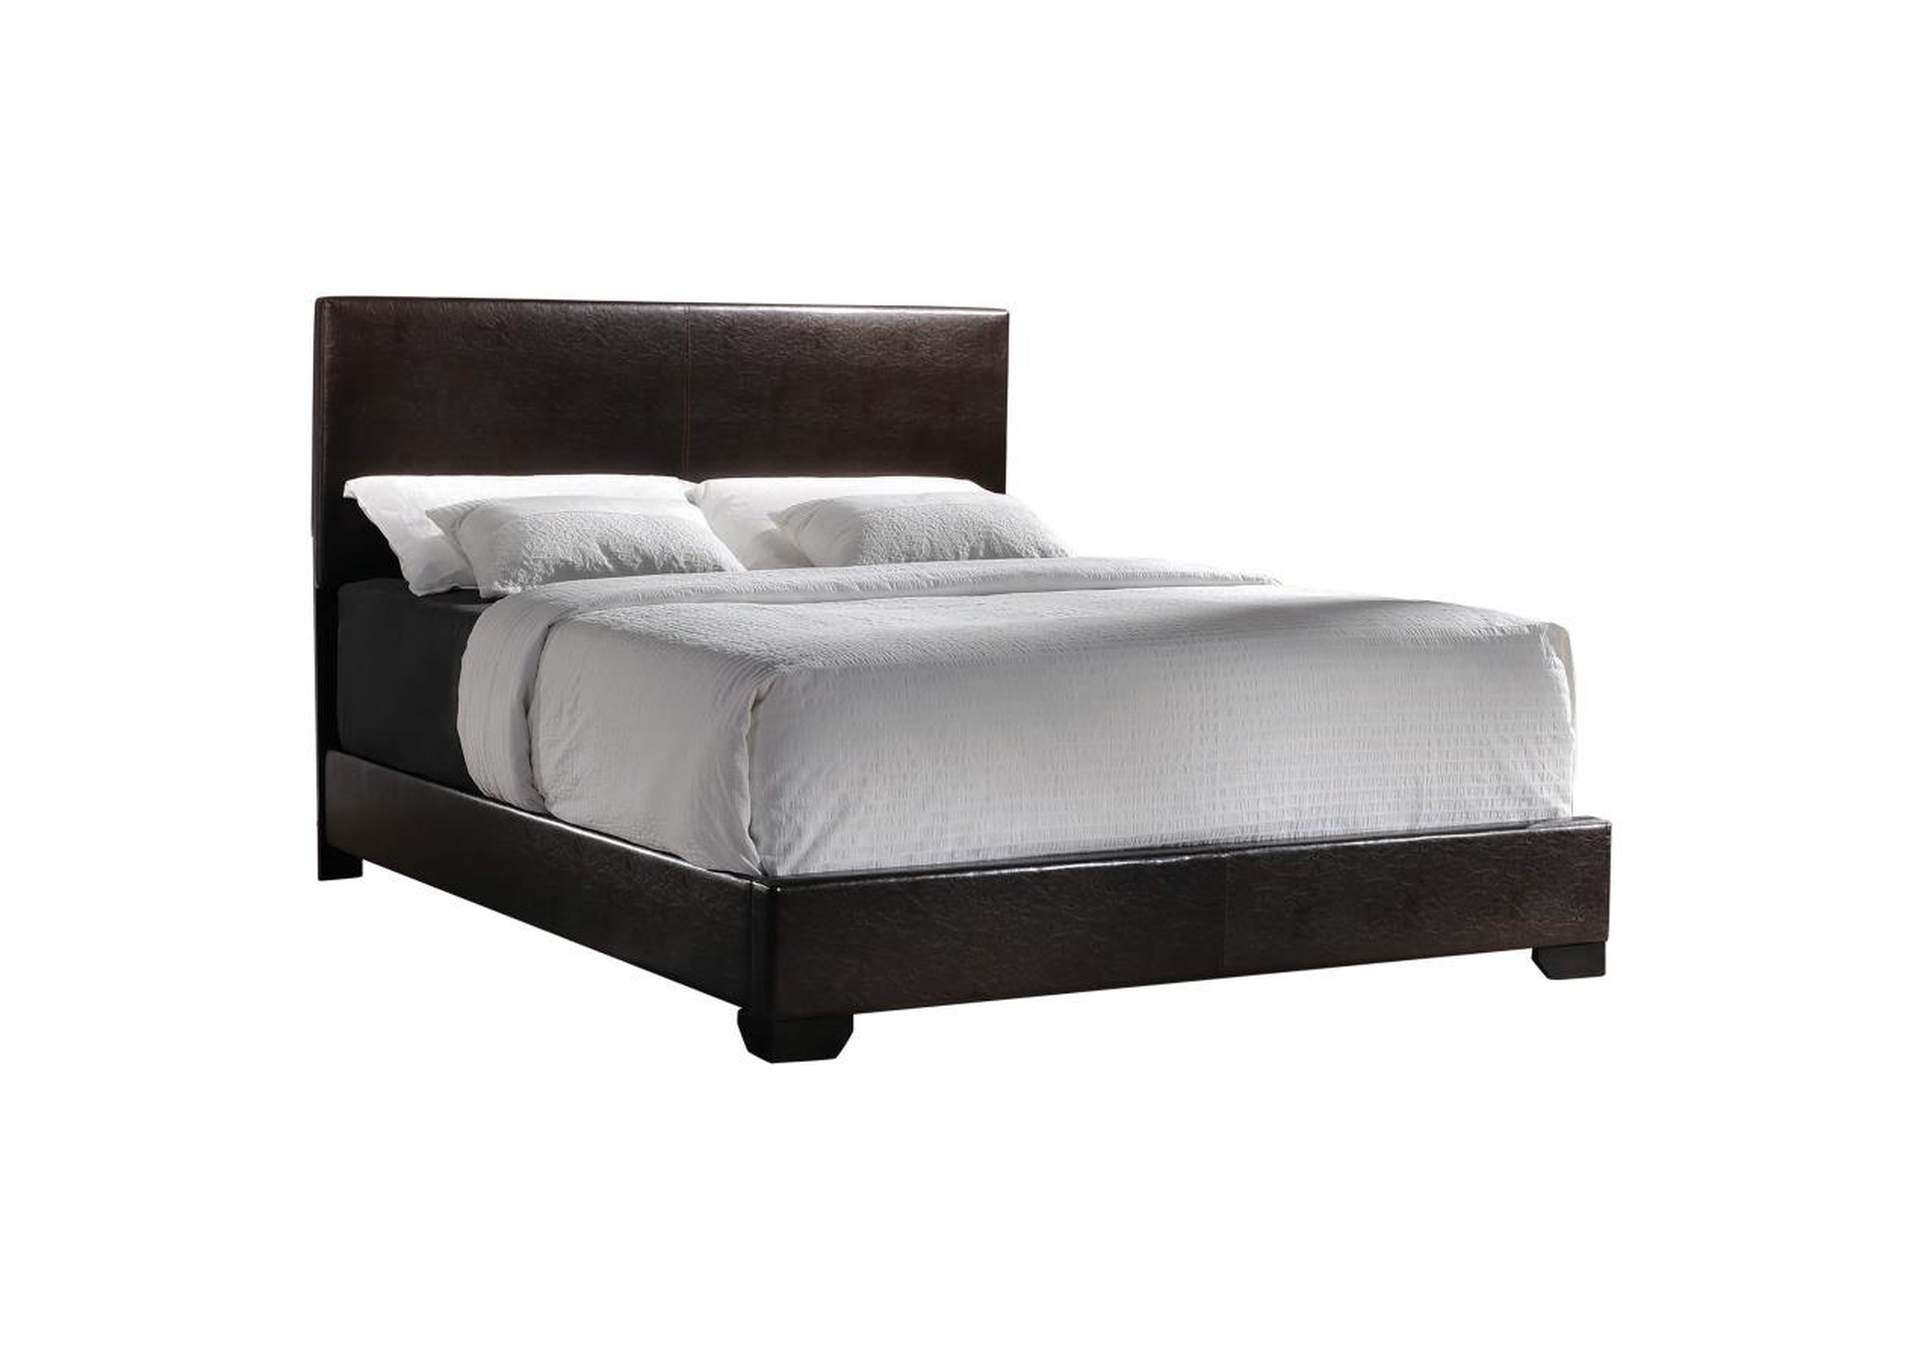 Conner Queen Upholstered Panel Bed Black And Dark Brown,Coaster Furniture